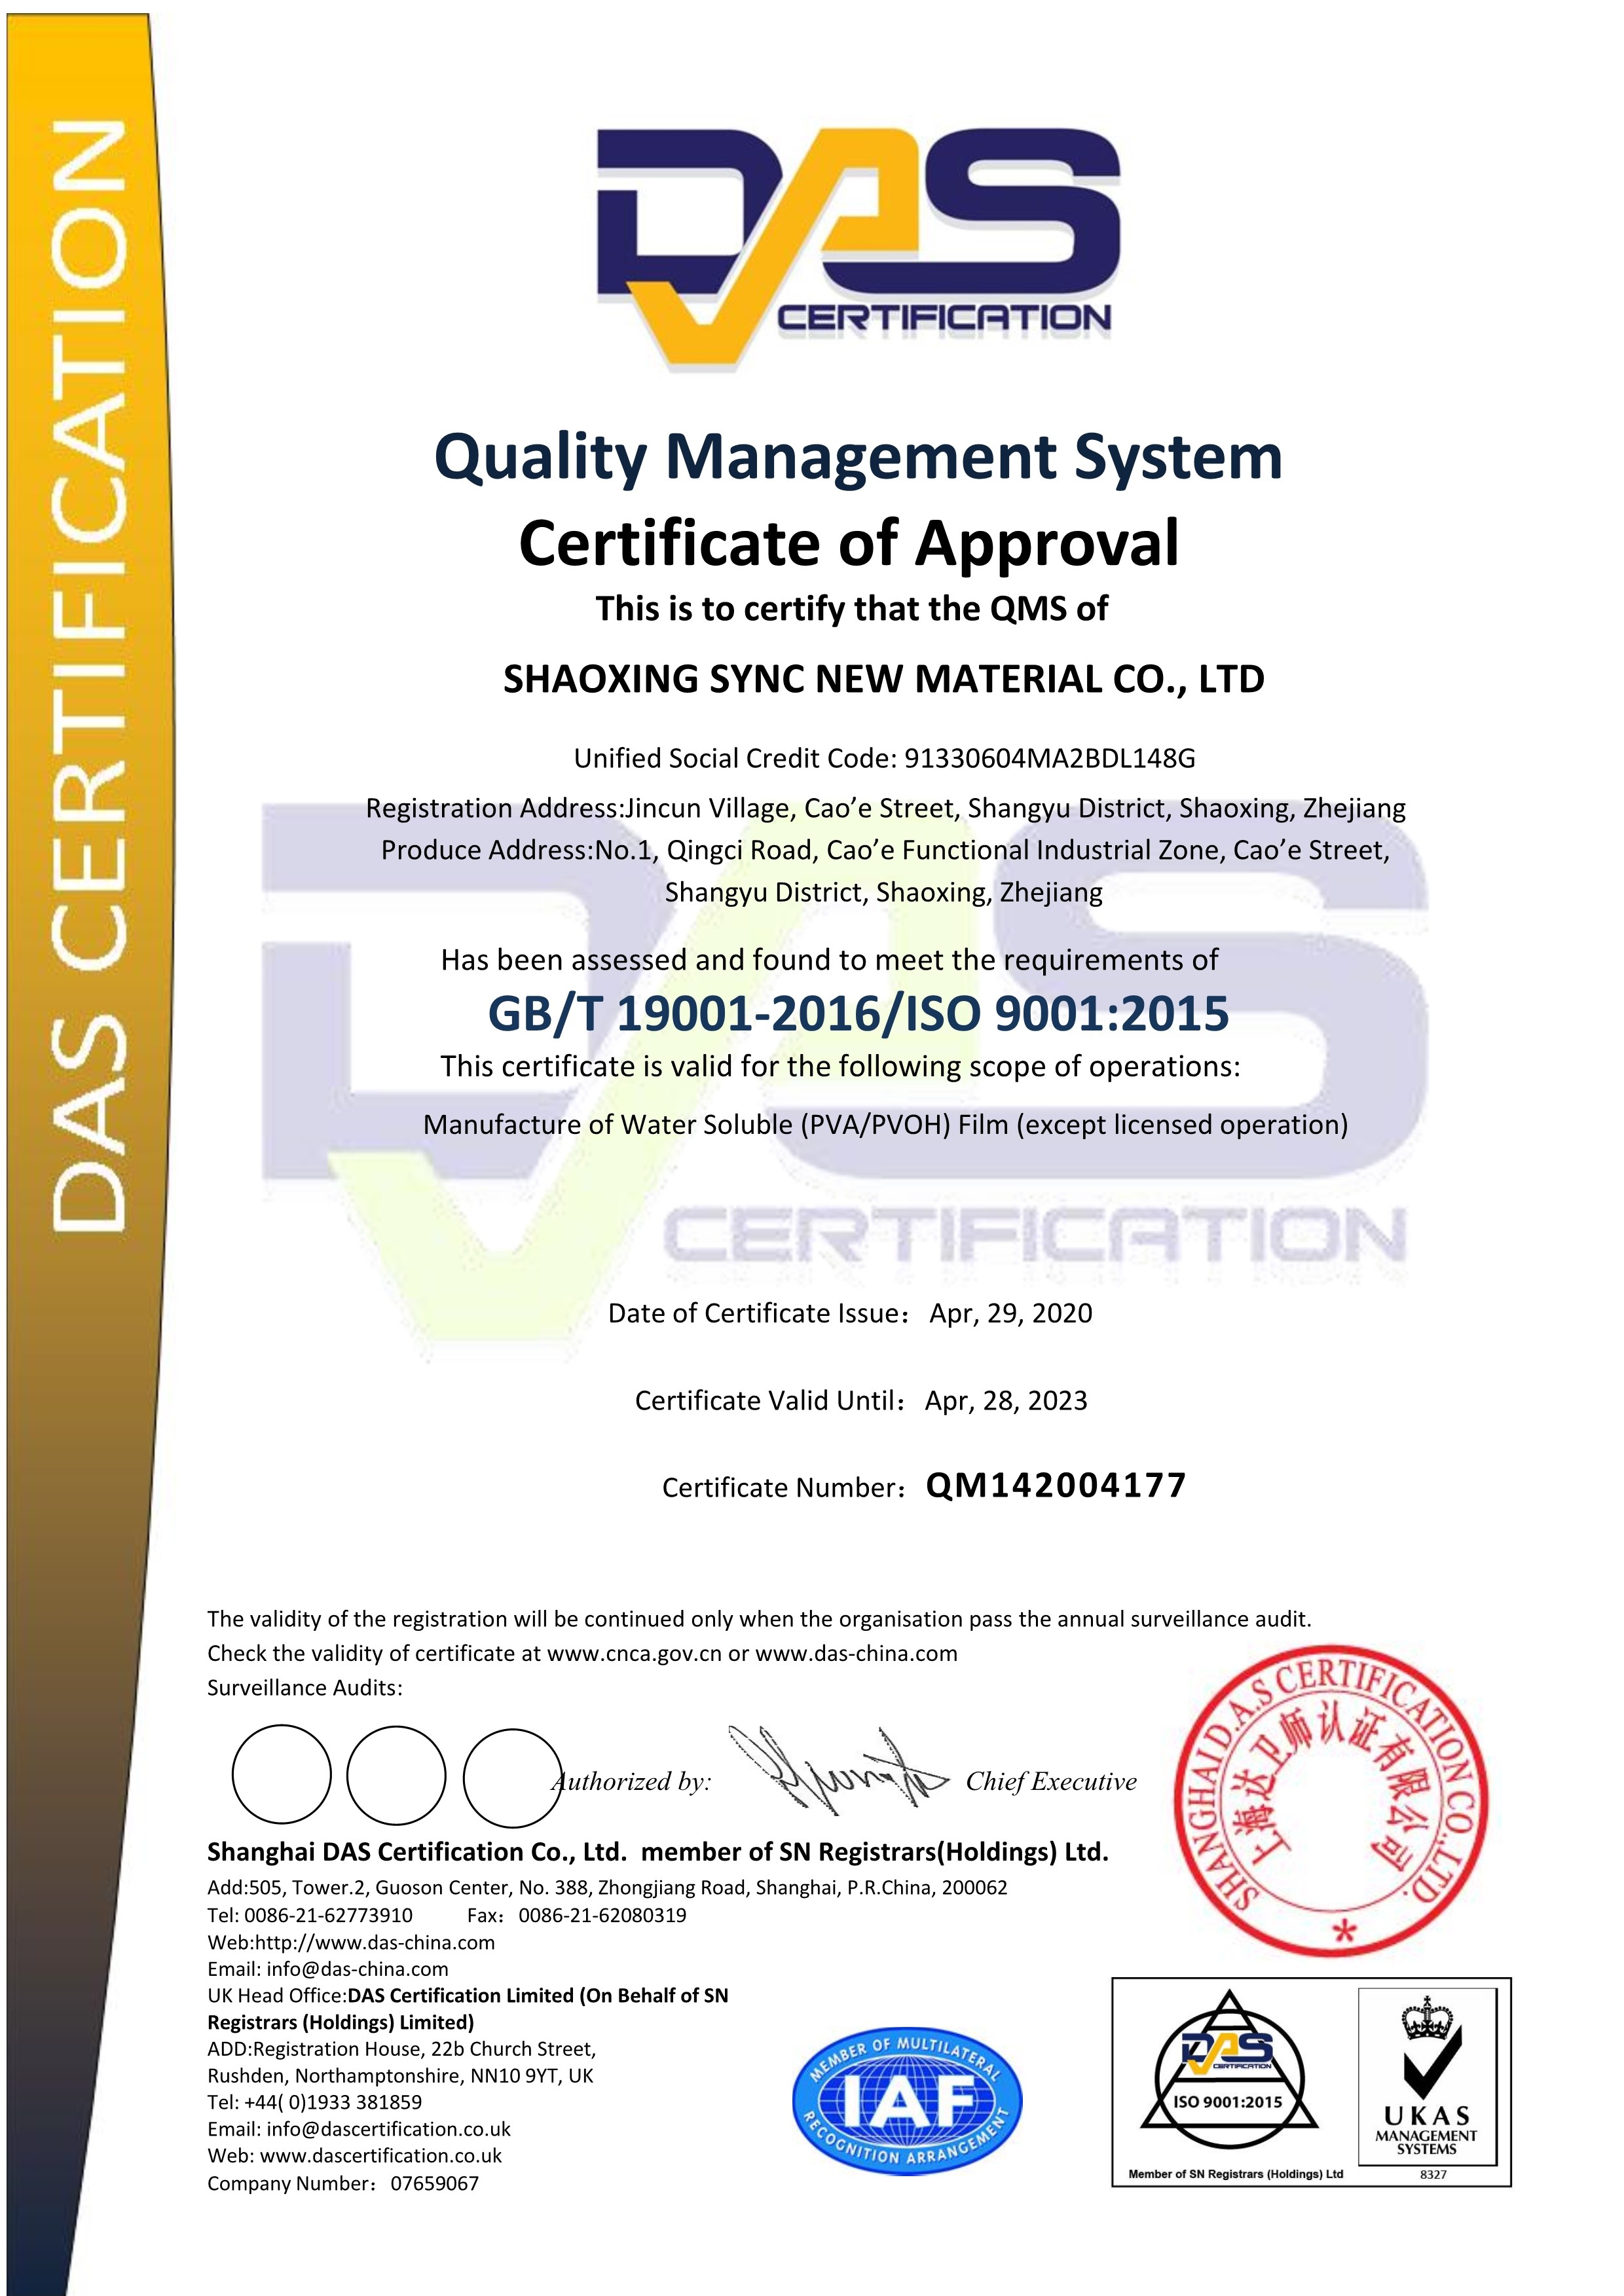 SHAOXING SYNC NEW MATERIAL CO.,LTD Certifications